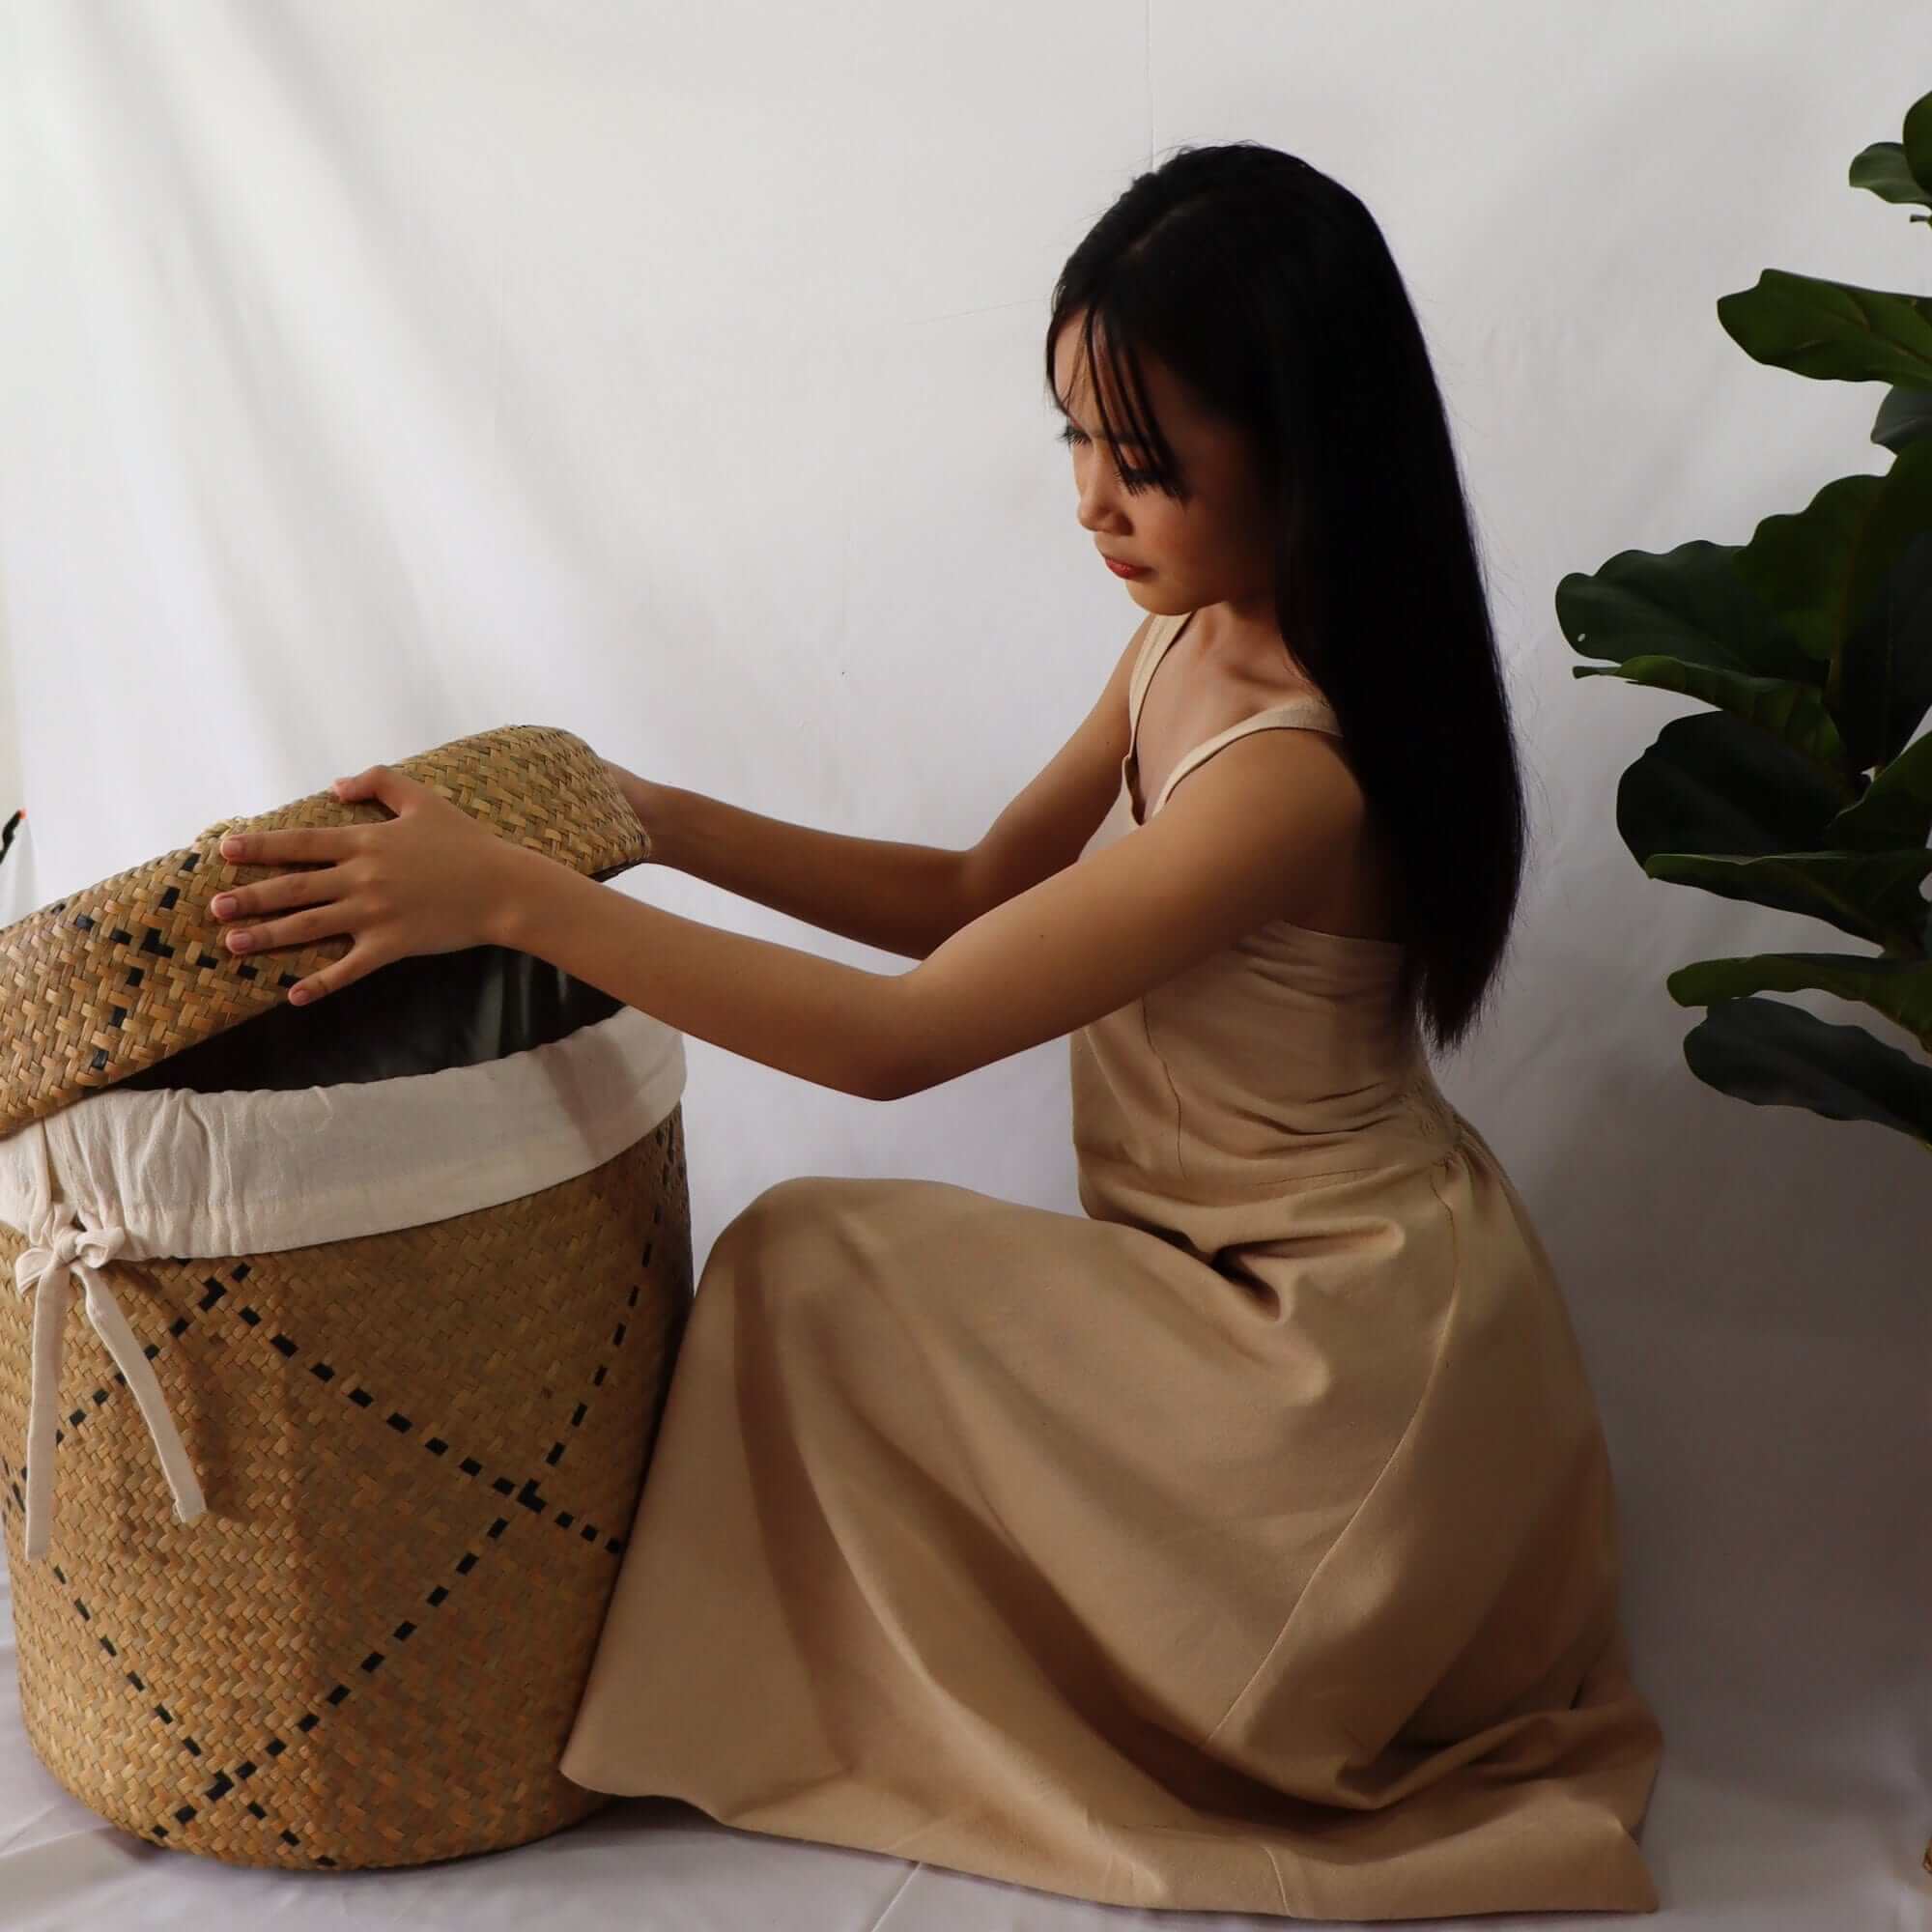 THAIHOME HOMEWARE KU MUD Handwoven Laundry Basket With Handles and a Lid